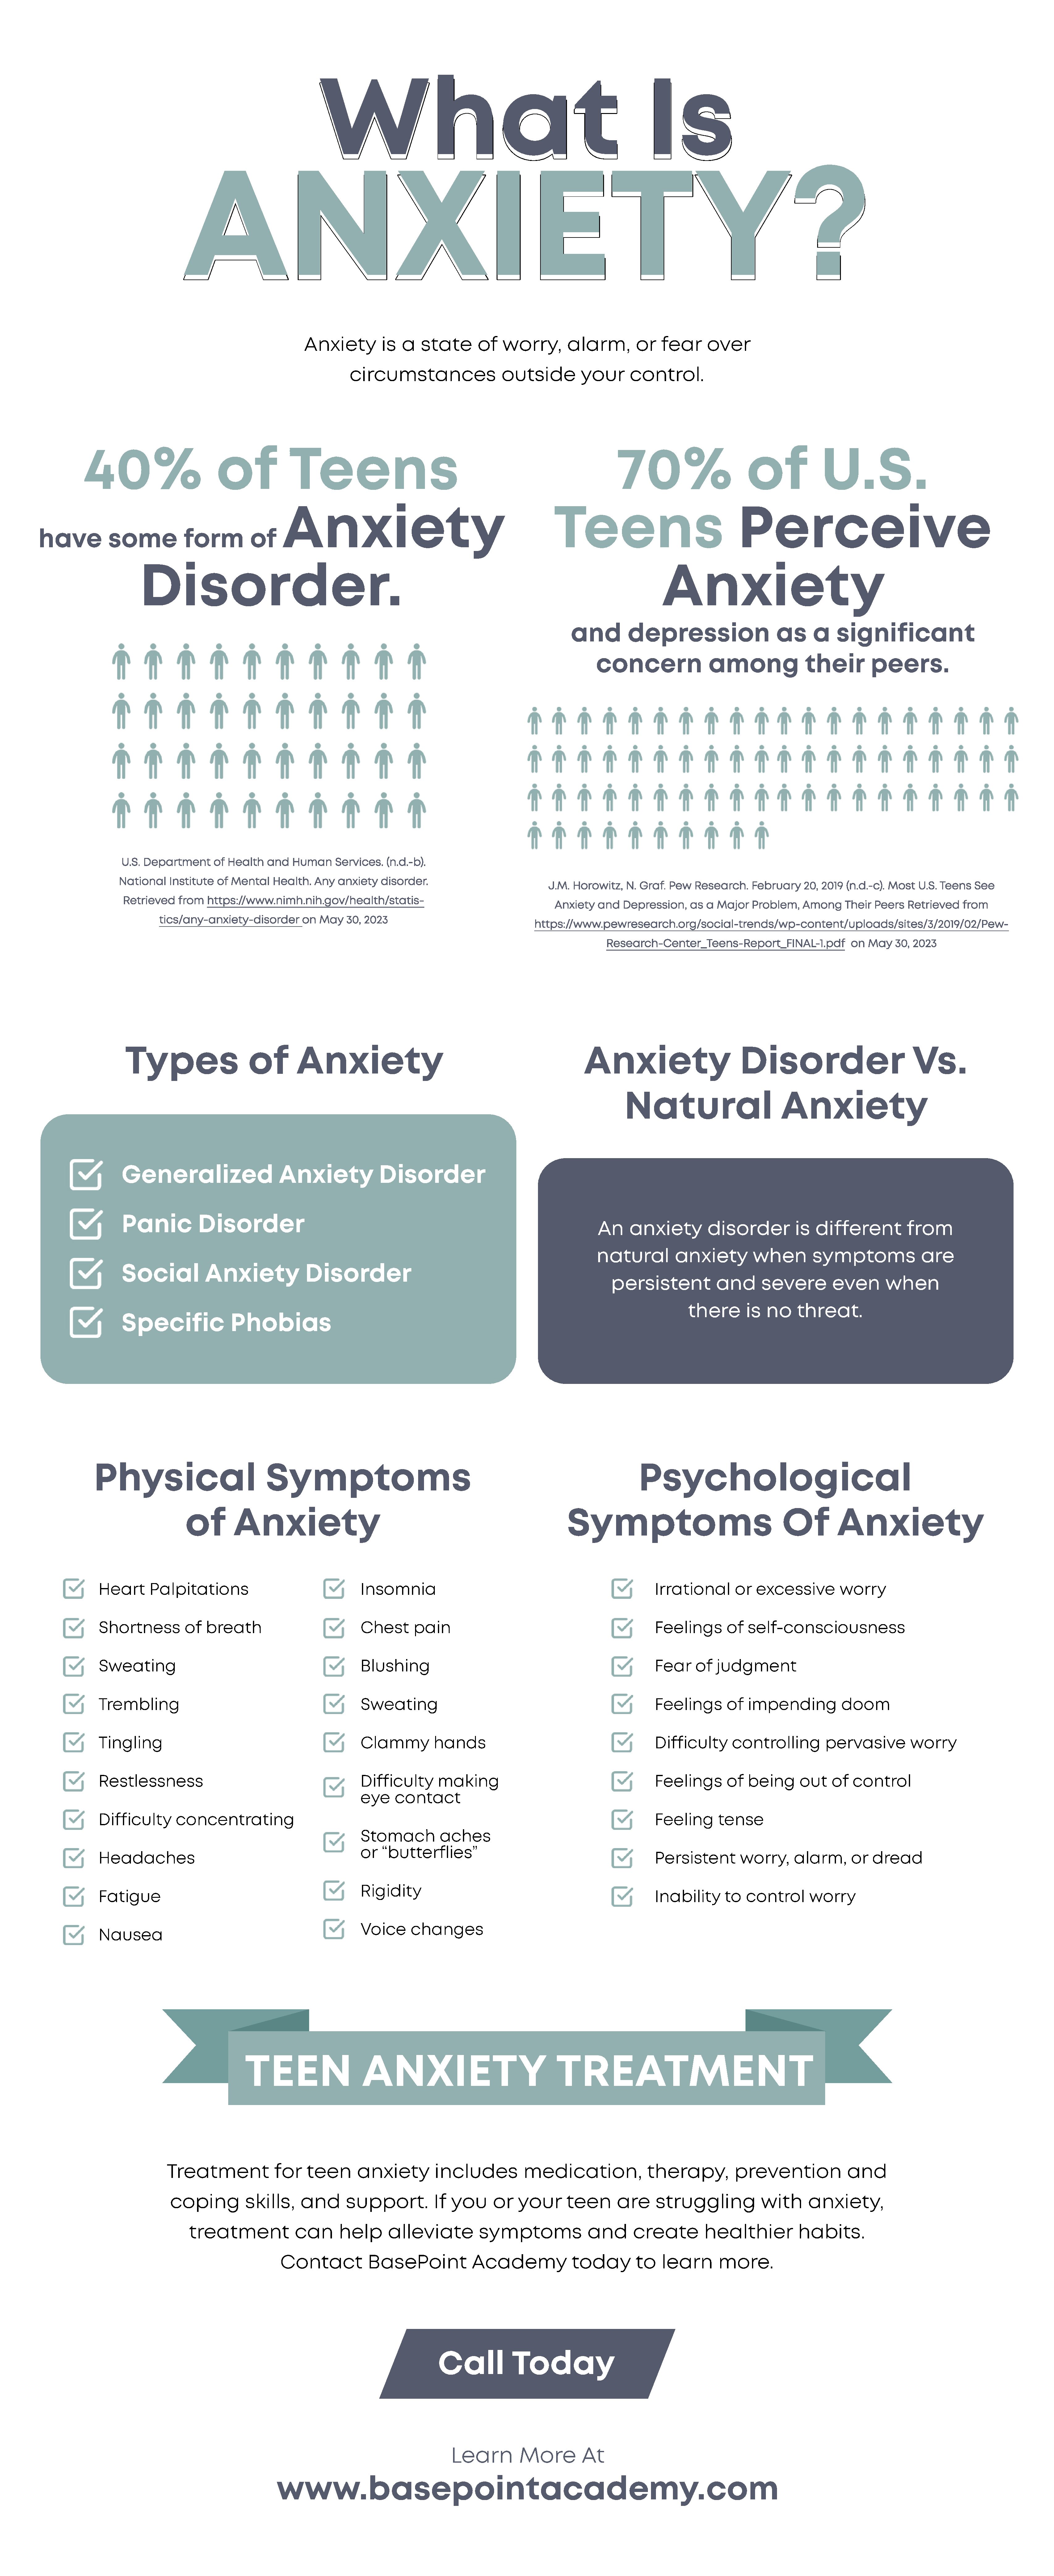 What Is Anxiety?